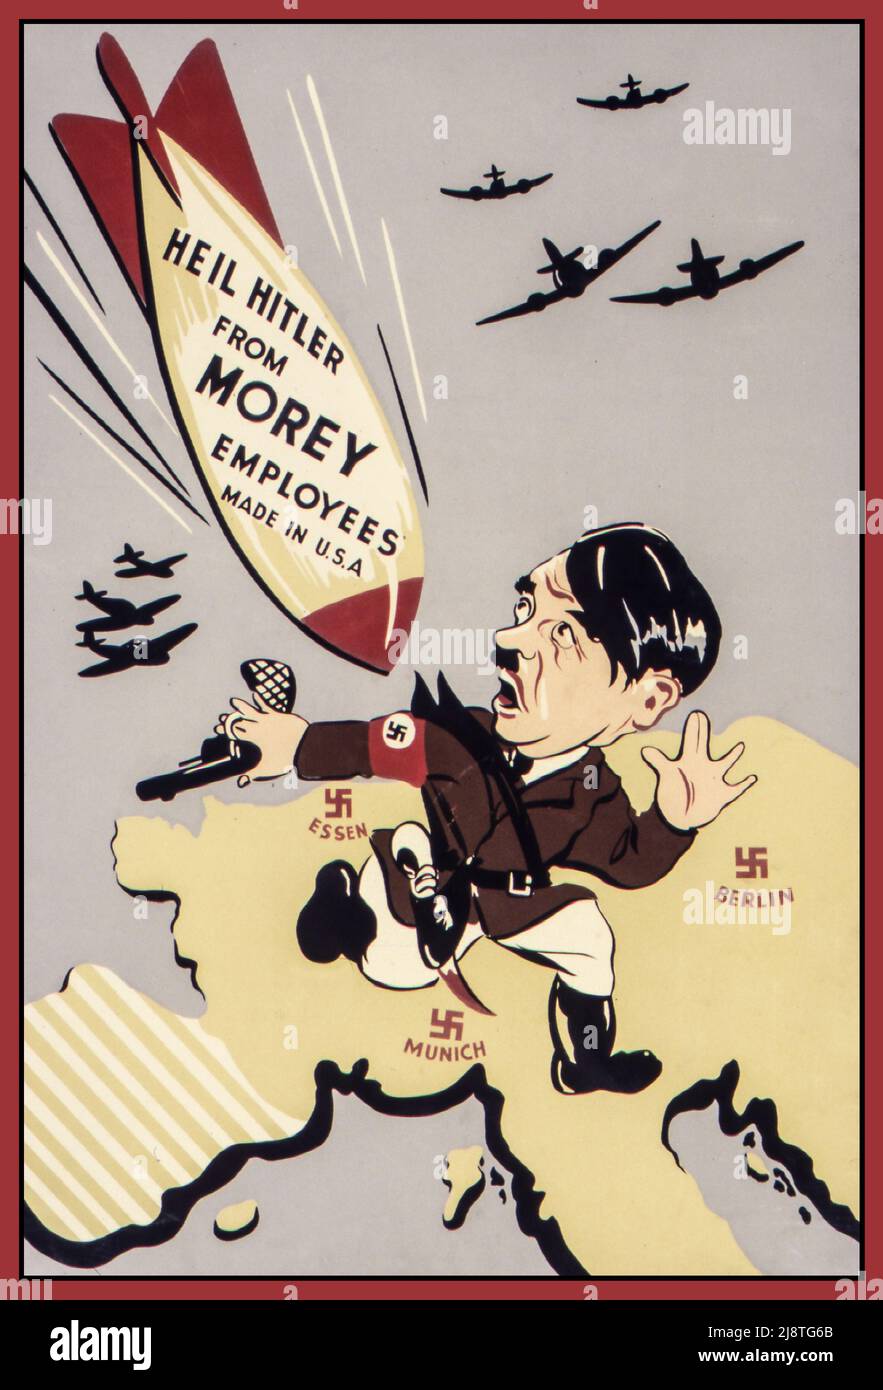 WW2 US Propaganda Poster featuring a running scared cartoon caricature Adolf Hitler over a swastika labeled Nazi Germany with an American Morey Munitions Bomb dropping.. 'Heil Hitler from Morey employees. Made in U.S.A' Date between circa 1942 and circa 1943 Office for Emergency Management. War Production Board. (01/1942 - 11/03/1945) World War II Second World War Stock Photo